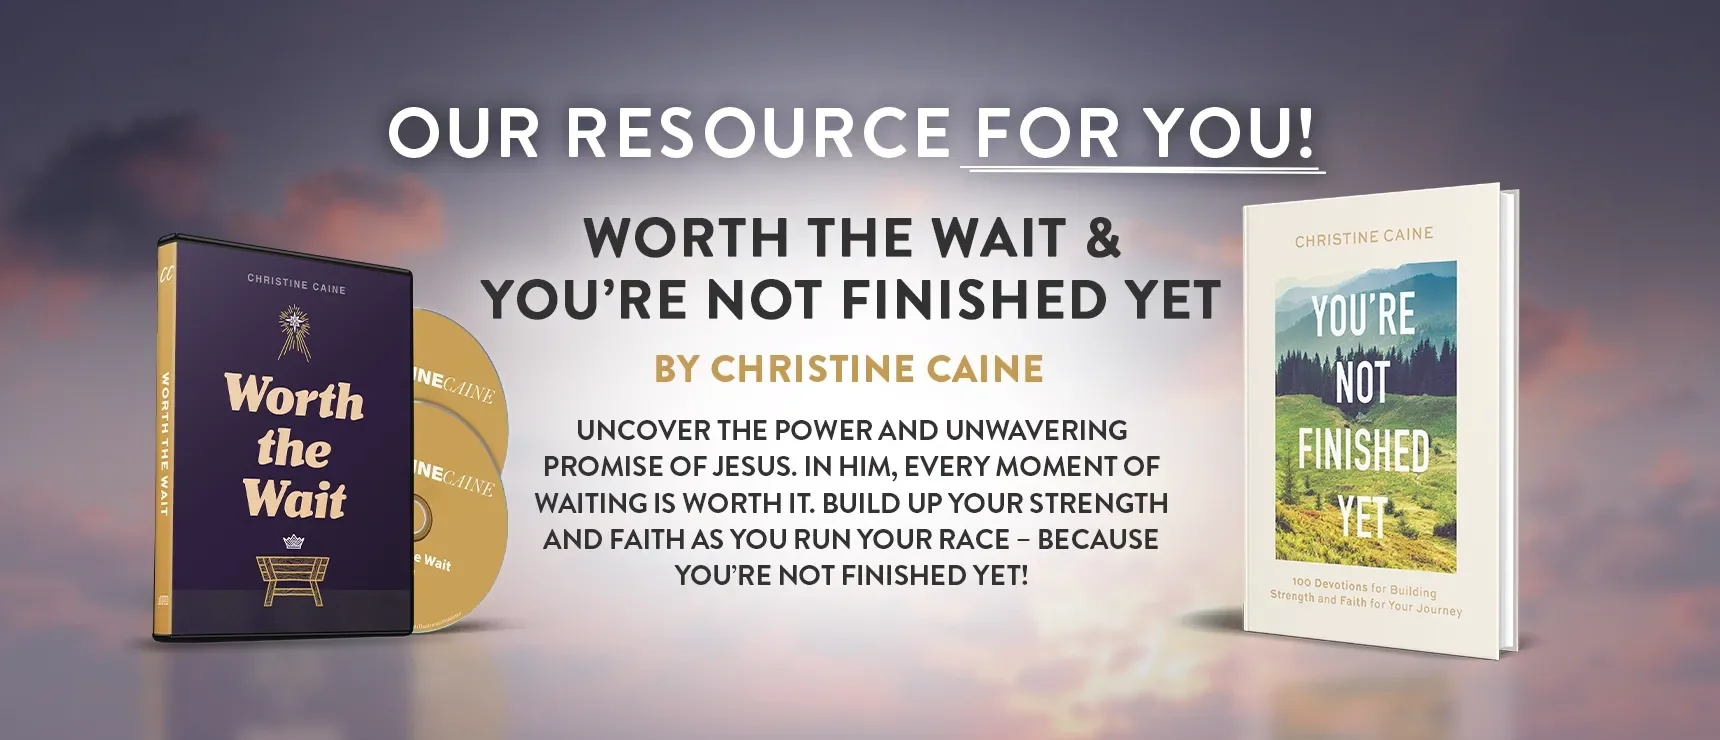 Worth the Wait + You're Not Finished Yet by Christine Caine